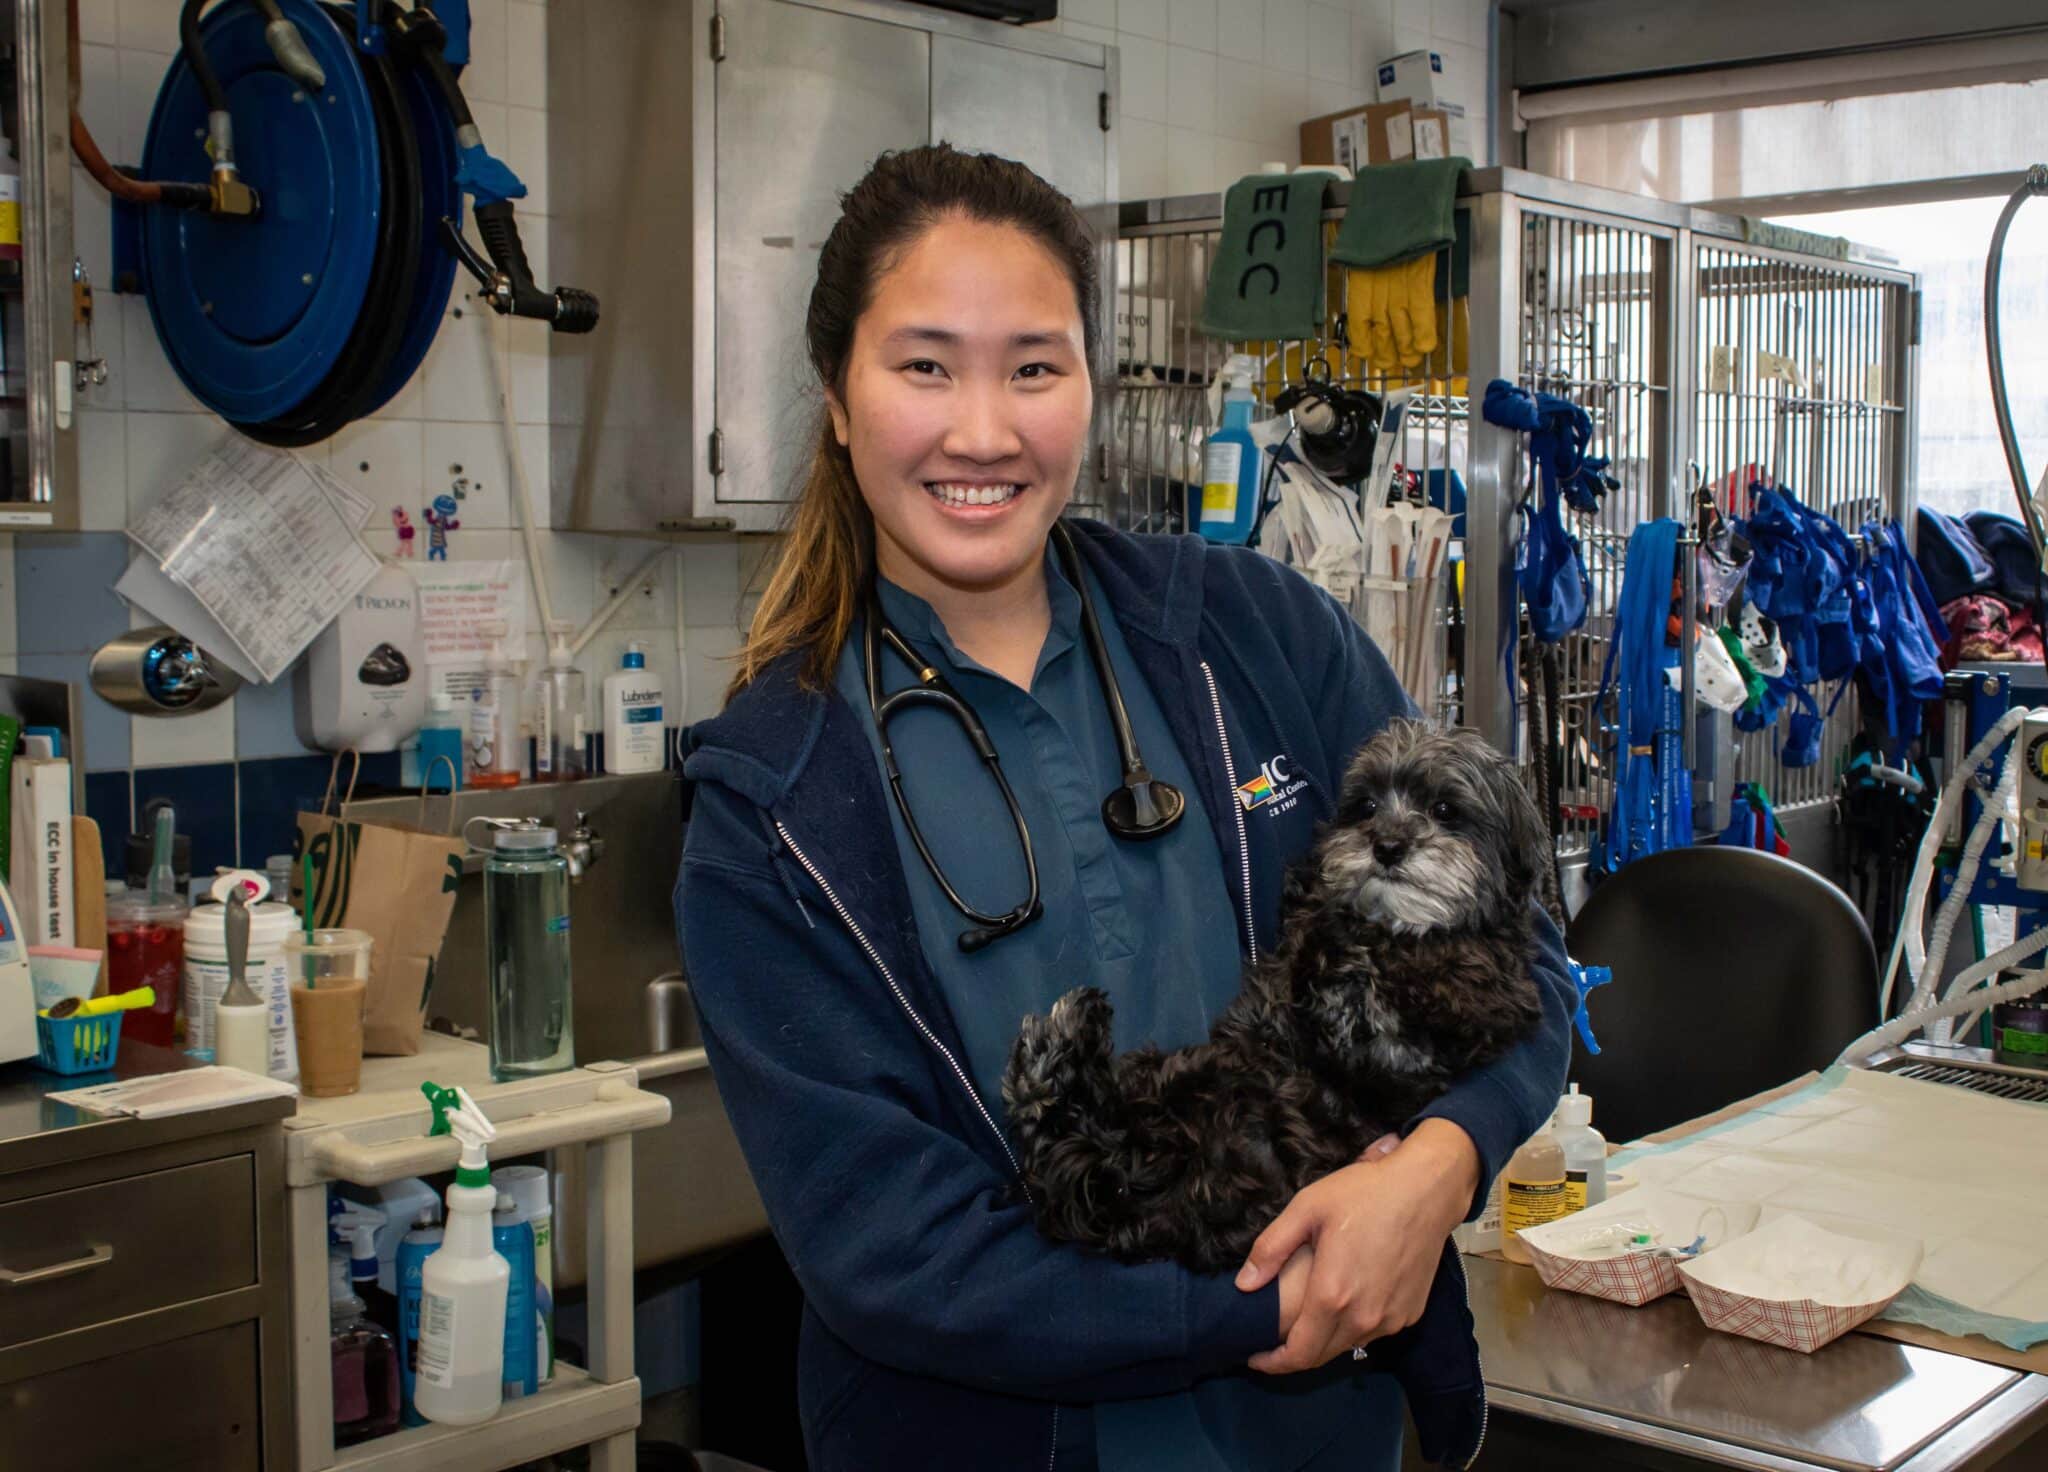 A veterinary technician with a dog